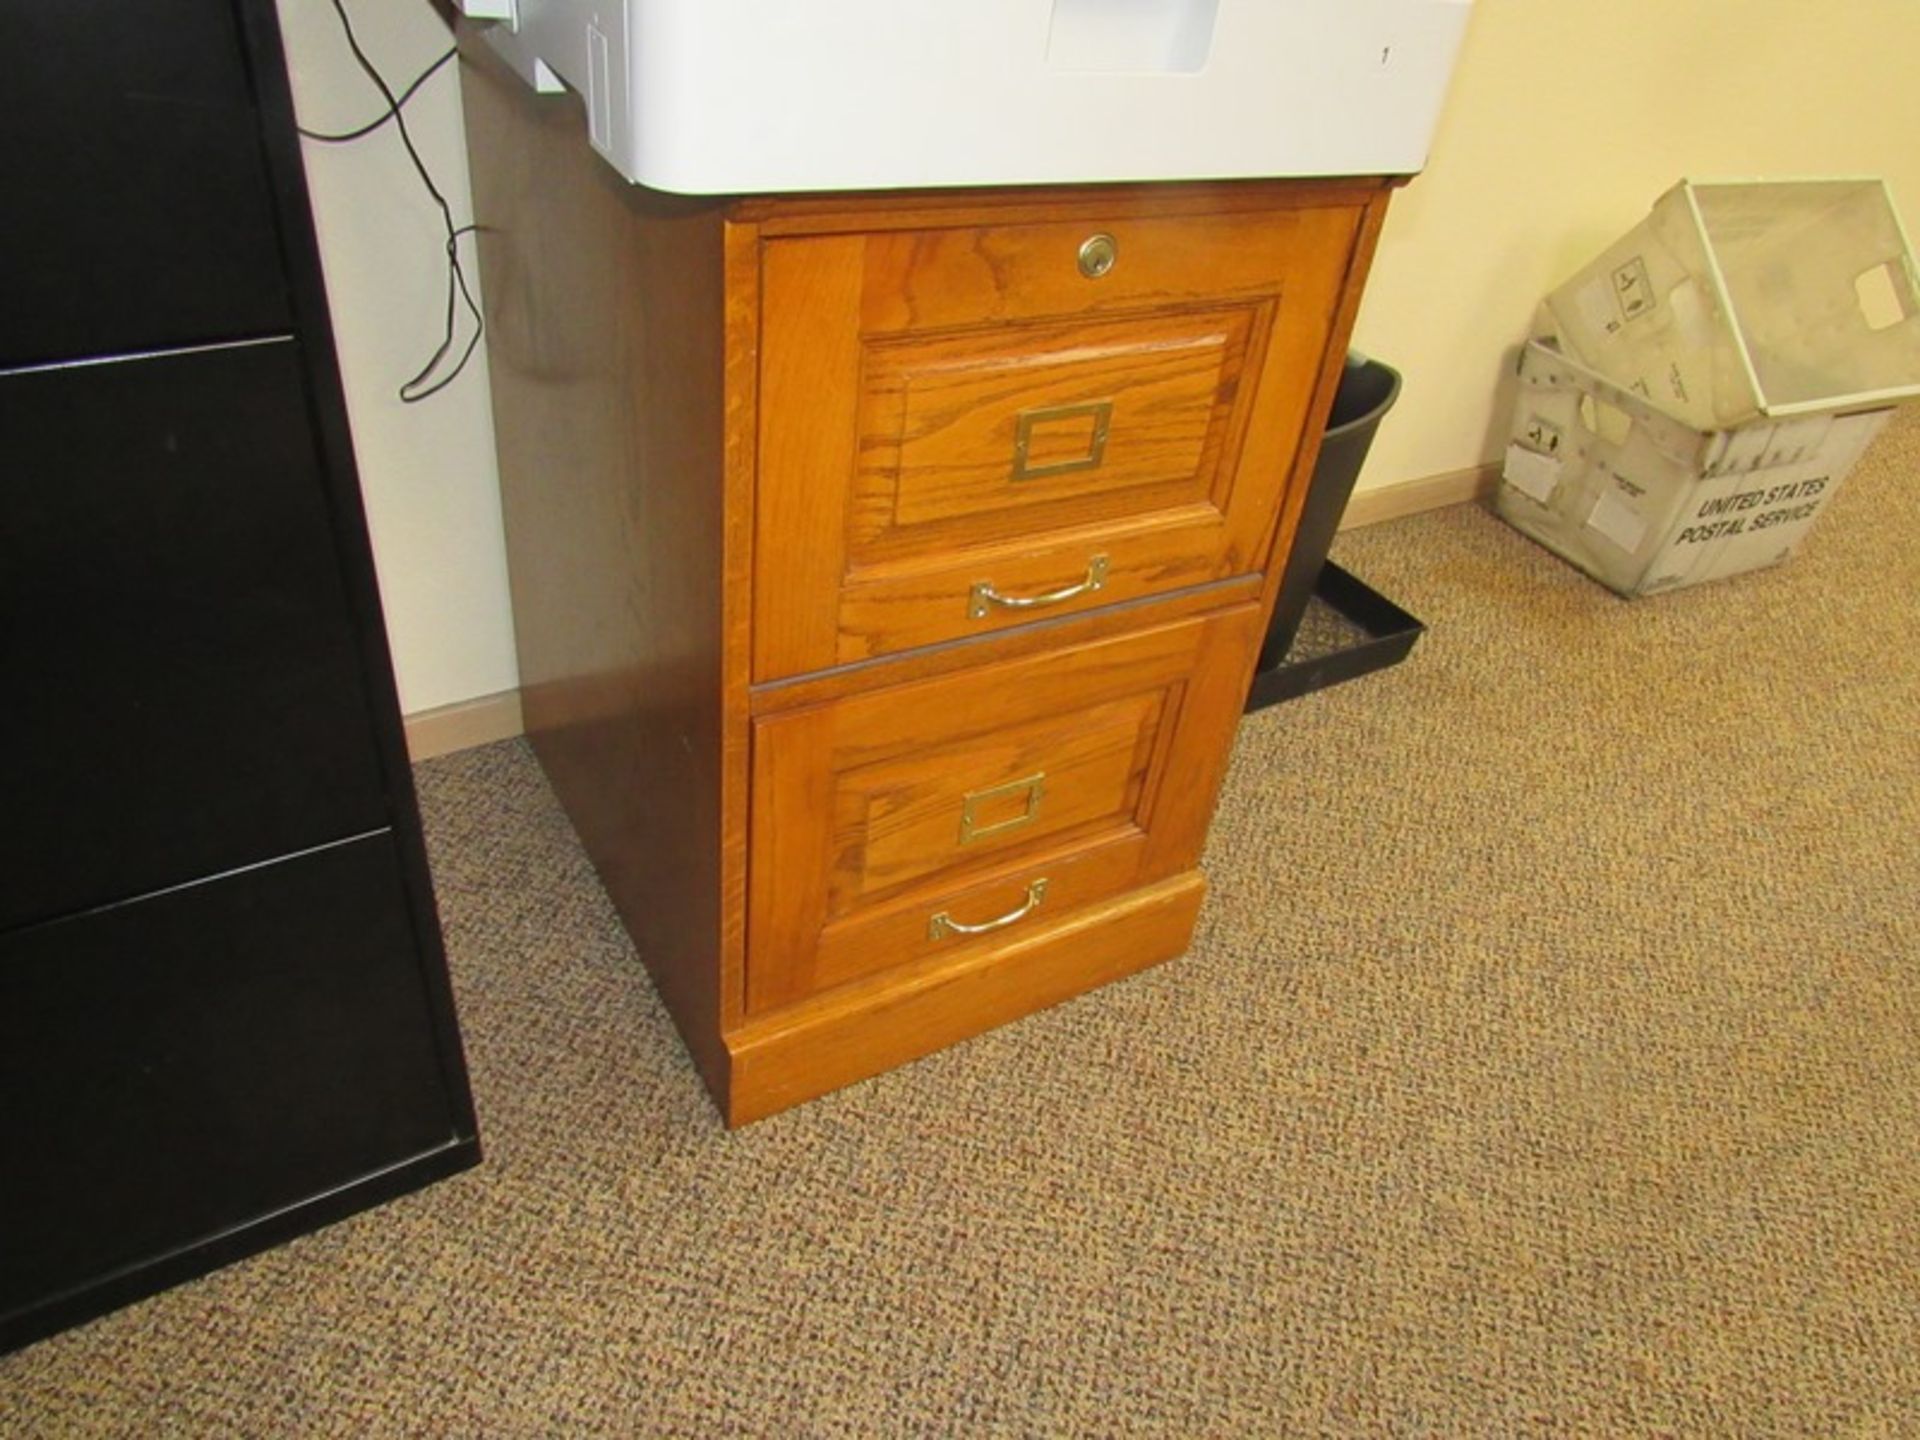 Lot Hallway, (4) 3-Drawer Lateral Files, Shelving Unit, File Cabinet (No Electronics or Tagged Items - Image 3 of 3